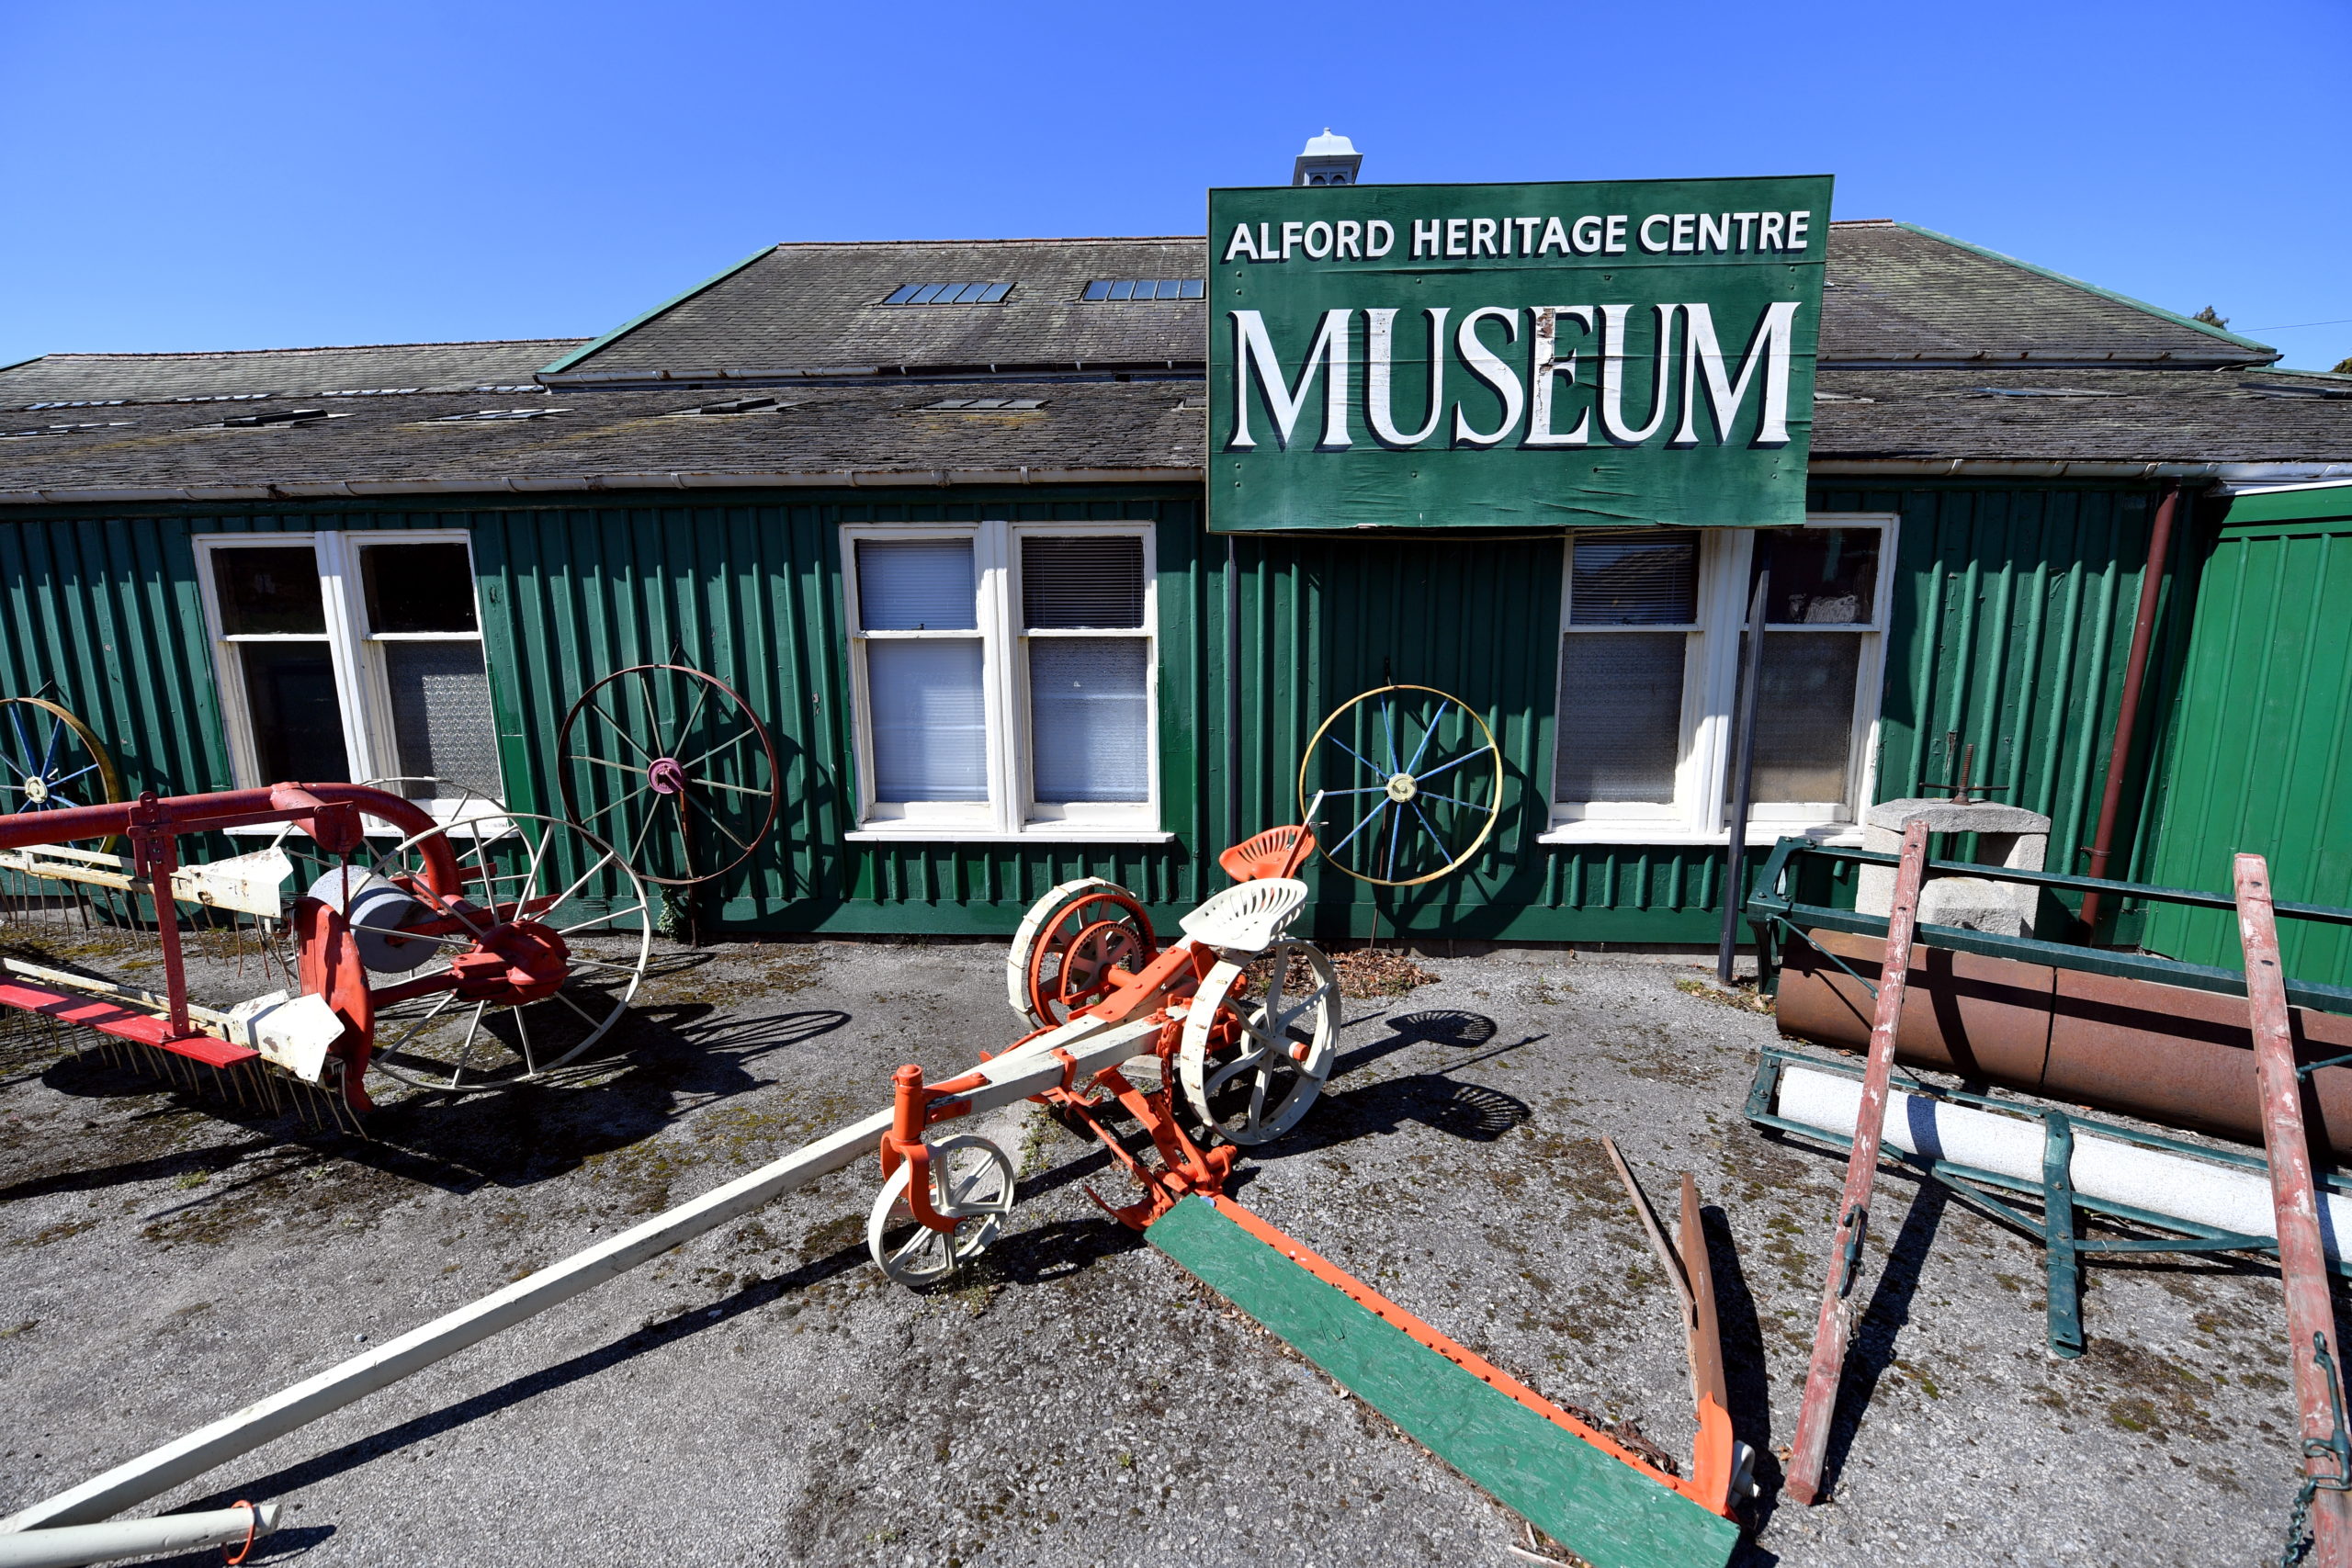 The Alford Heritage Museum will not be opening this season.